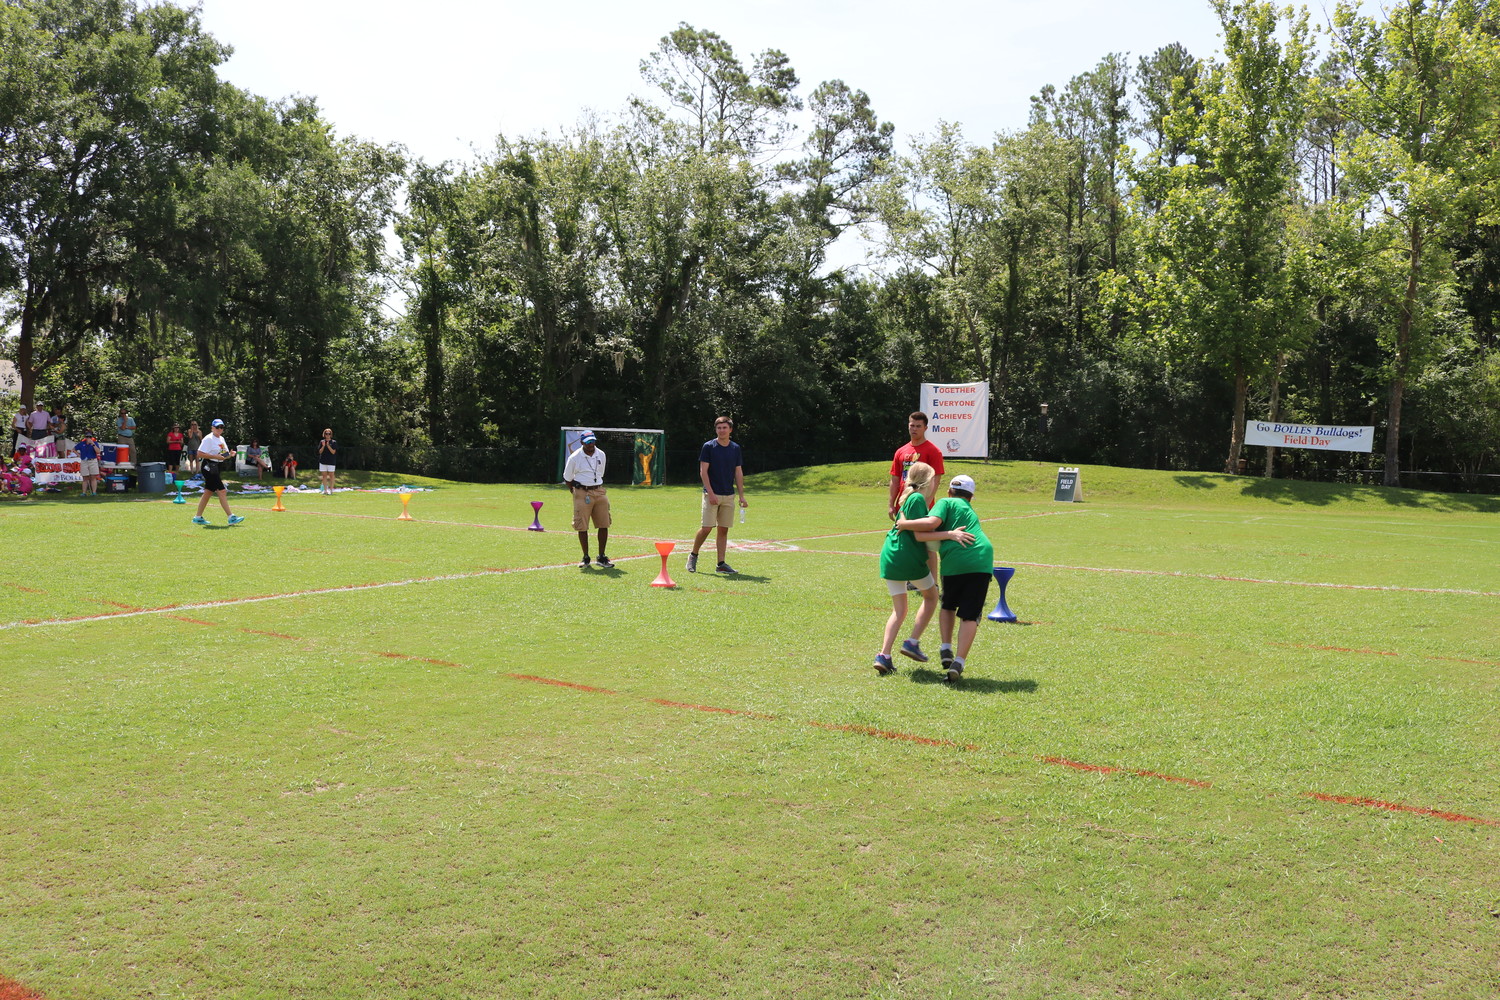 Bolles PVB students play a game at last week’s Field Day event in which they had to hug each other to hold a ball and carry it around a cone.